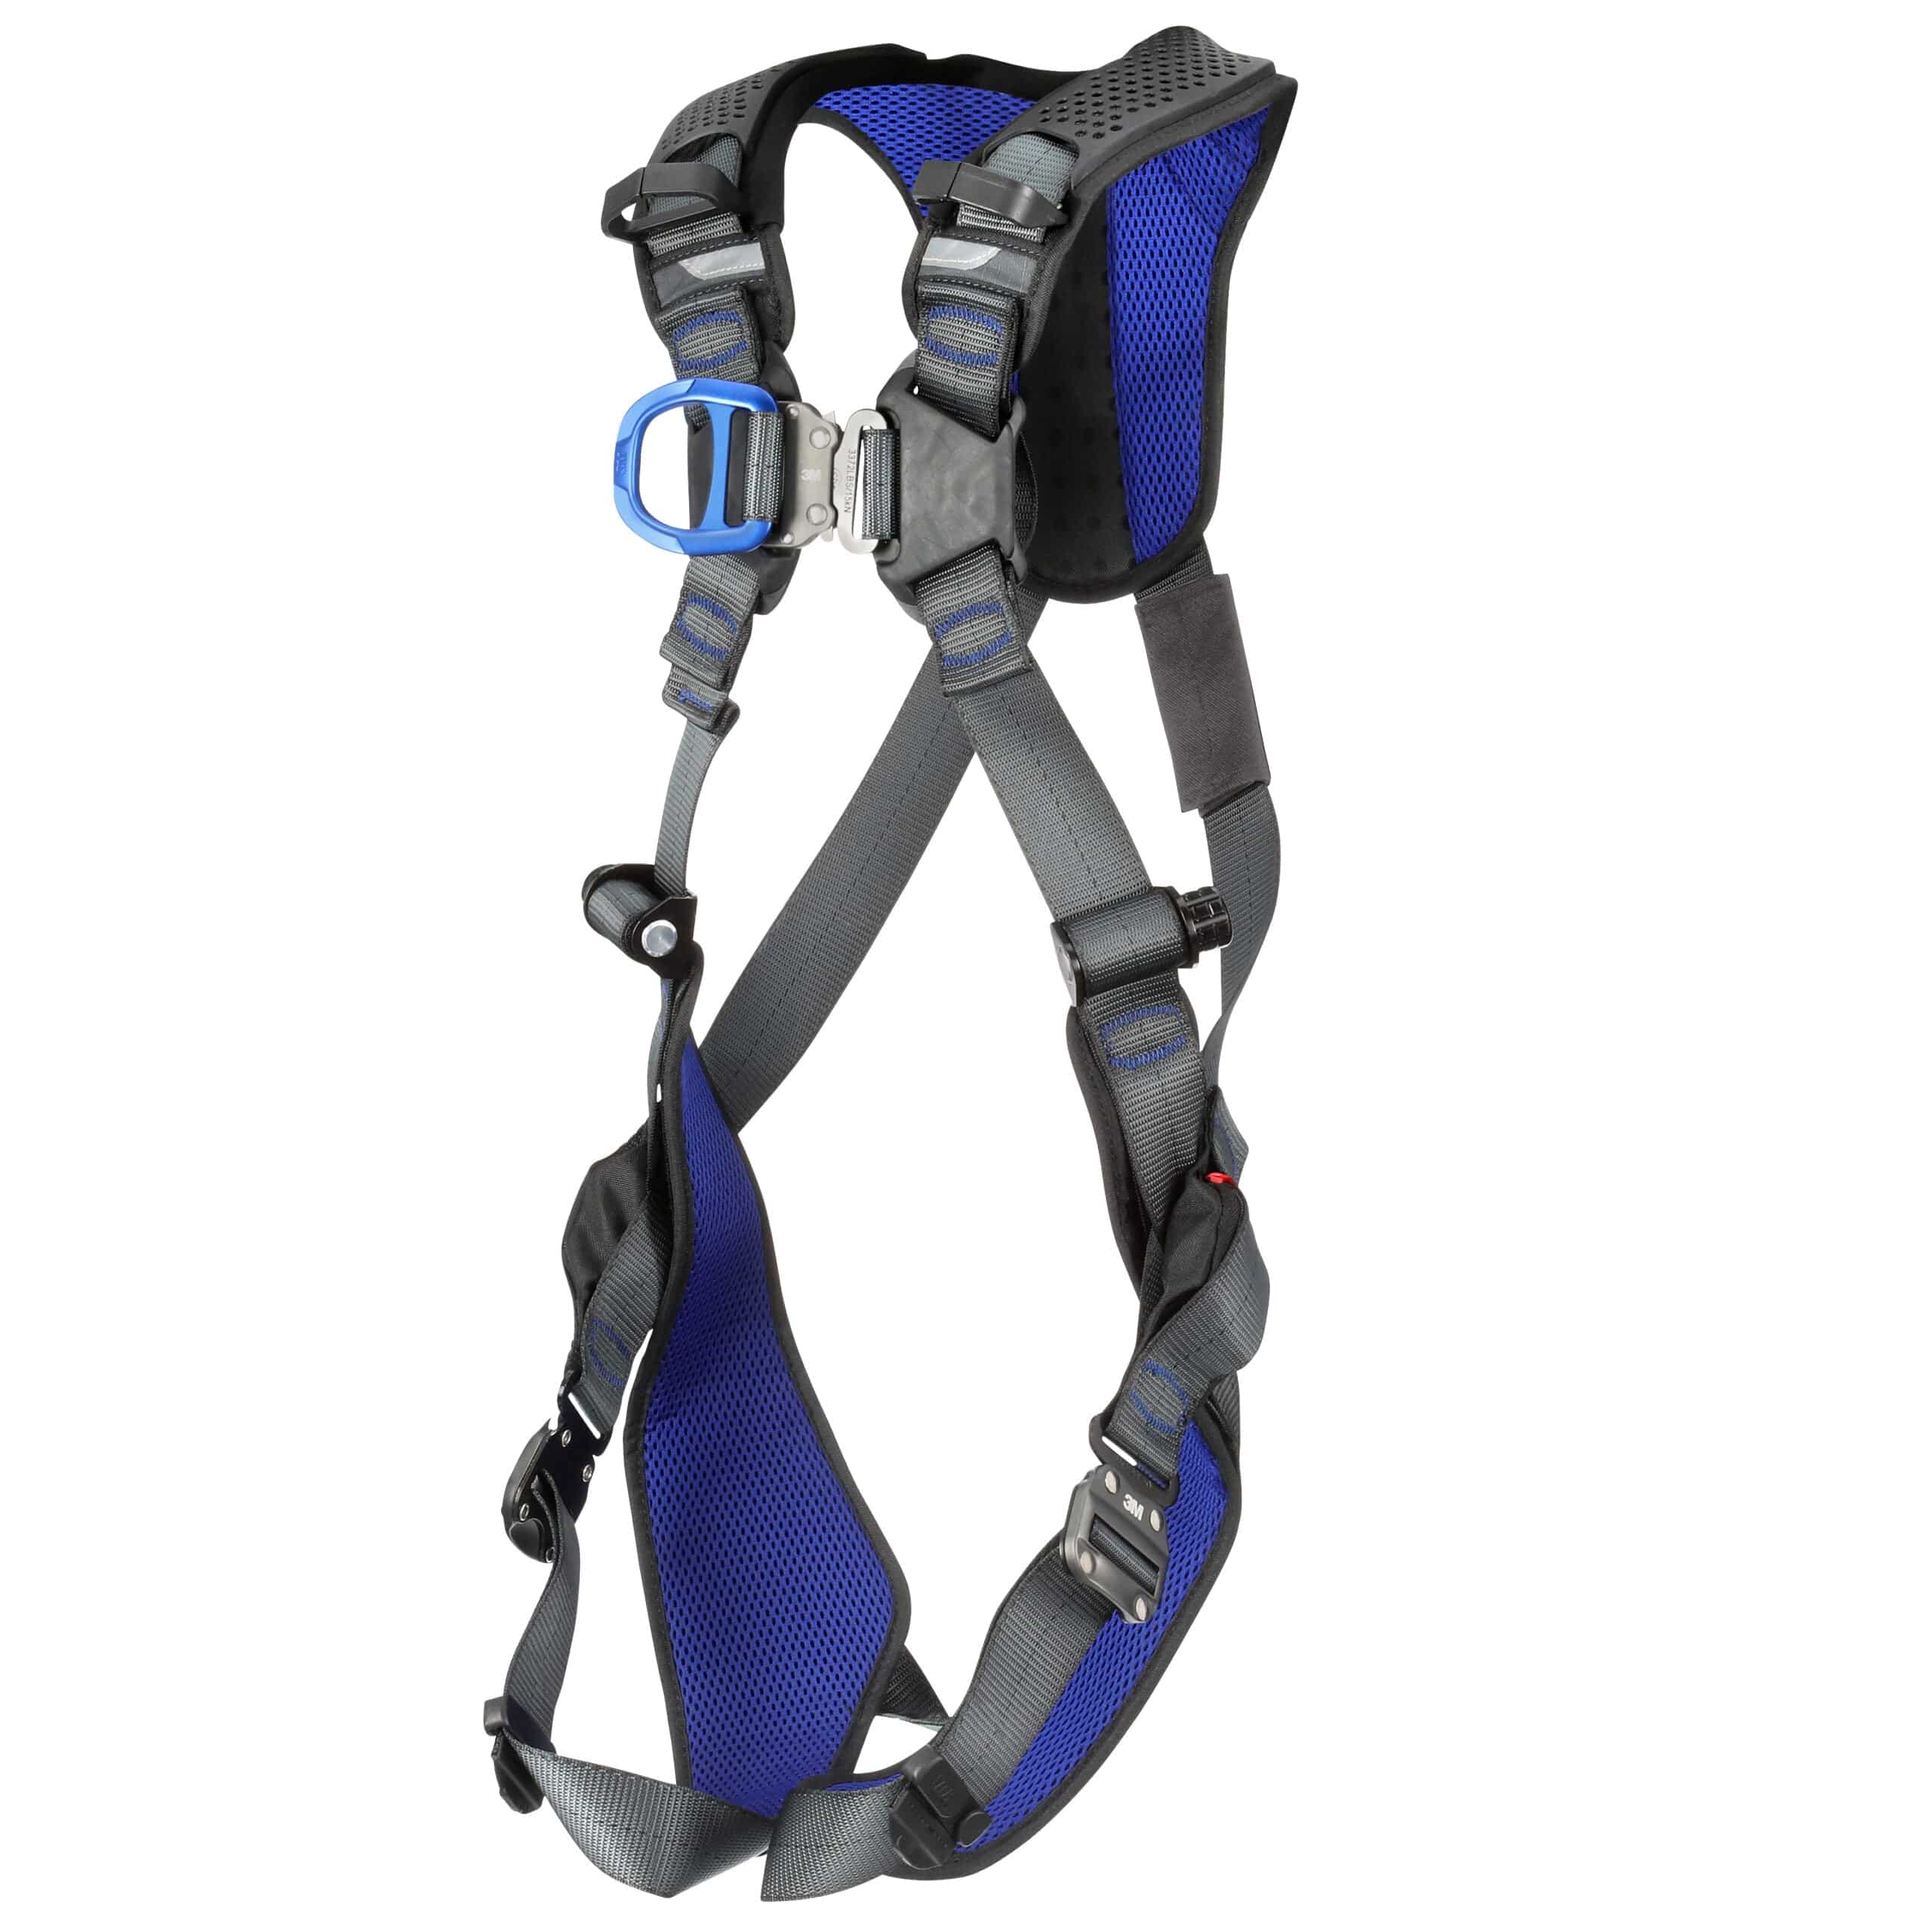 3M DBI SALA ExoFit XE200 Comfort Safety Harness - SecureHeights